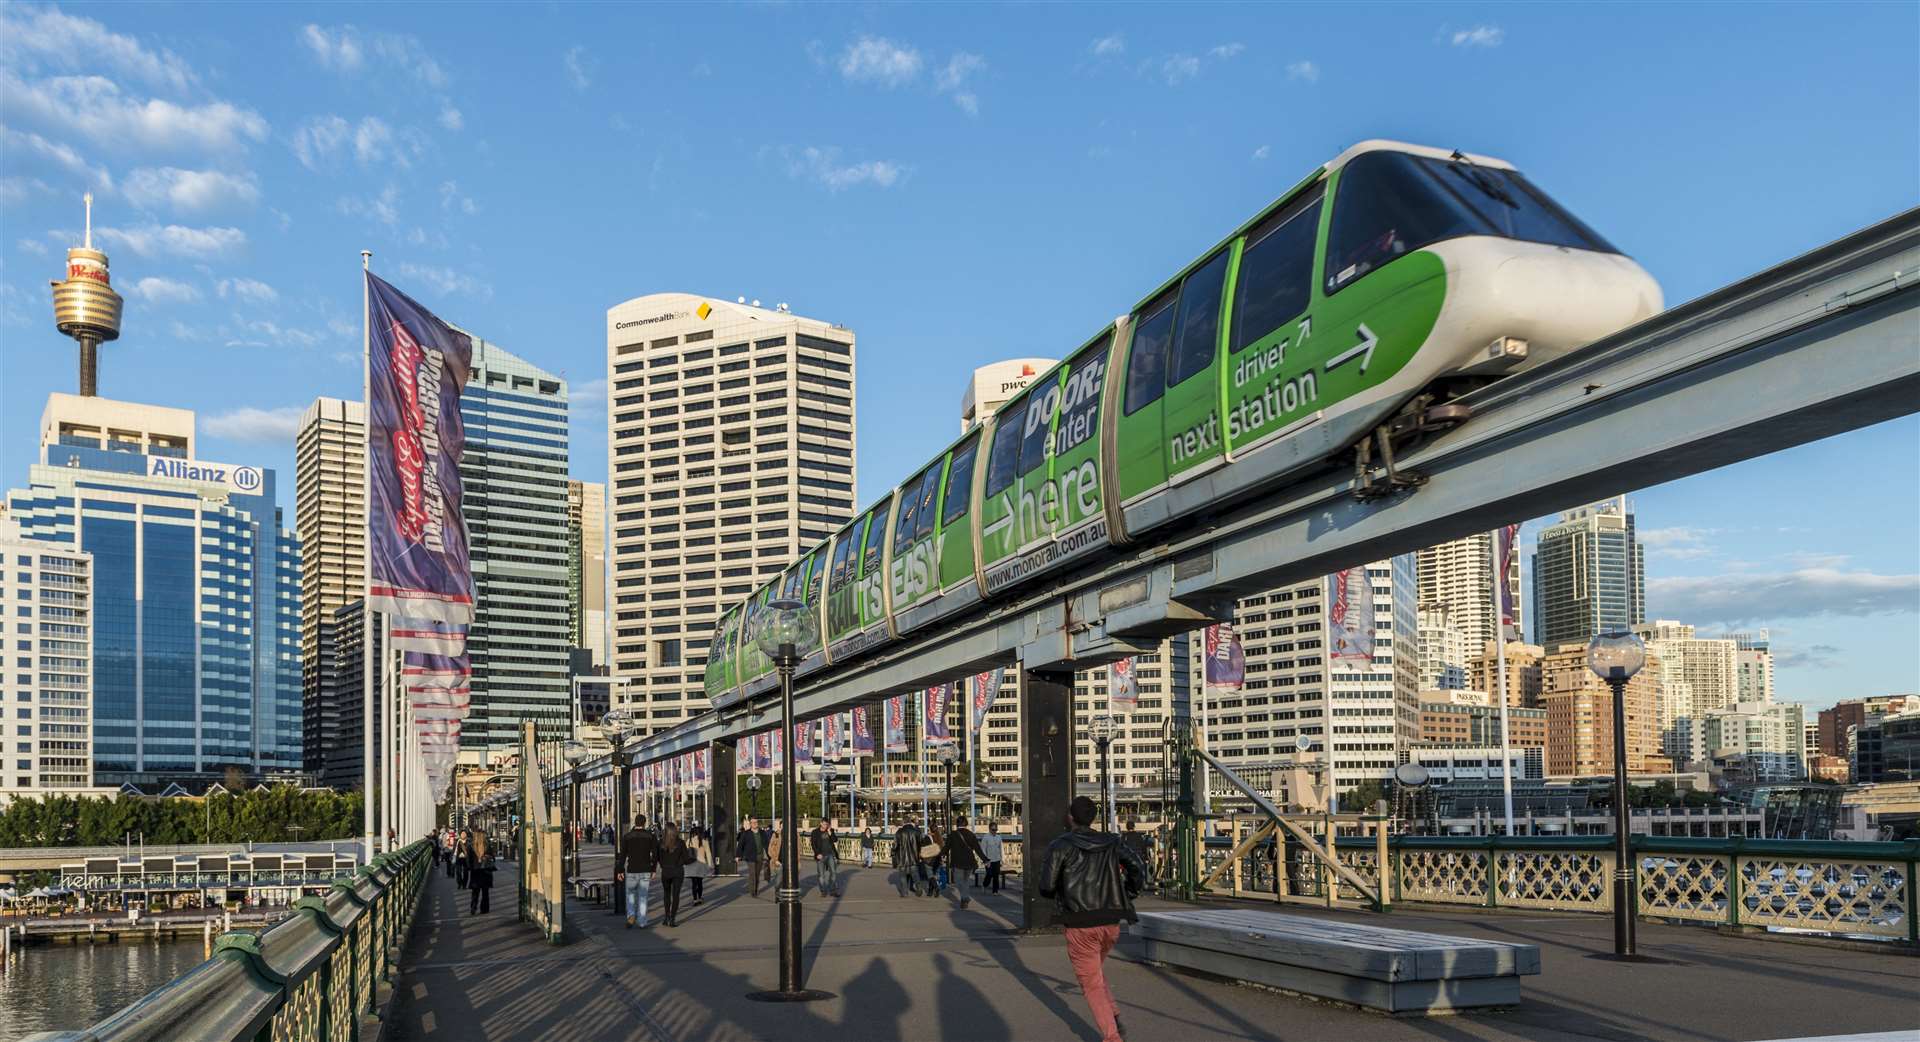 The Sydney monorail, pictured in 2012, closed a year later